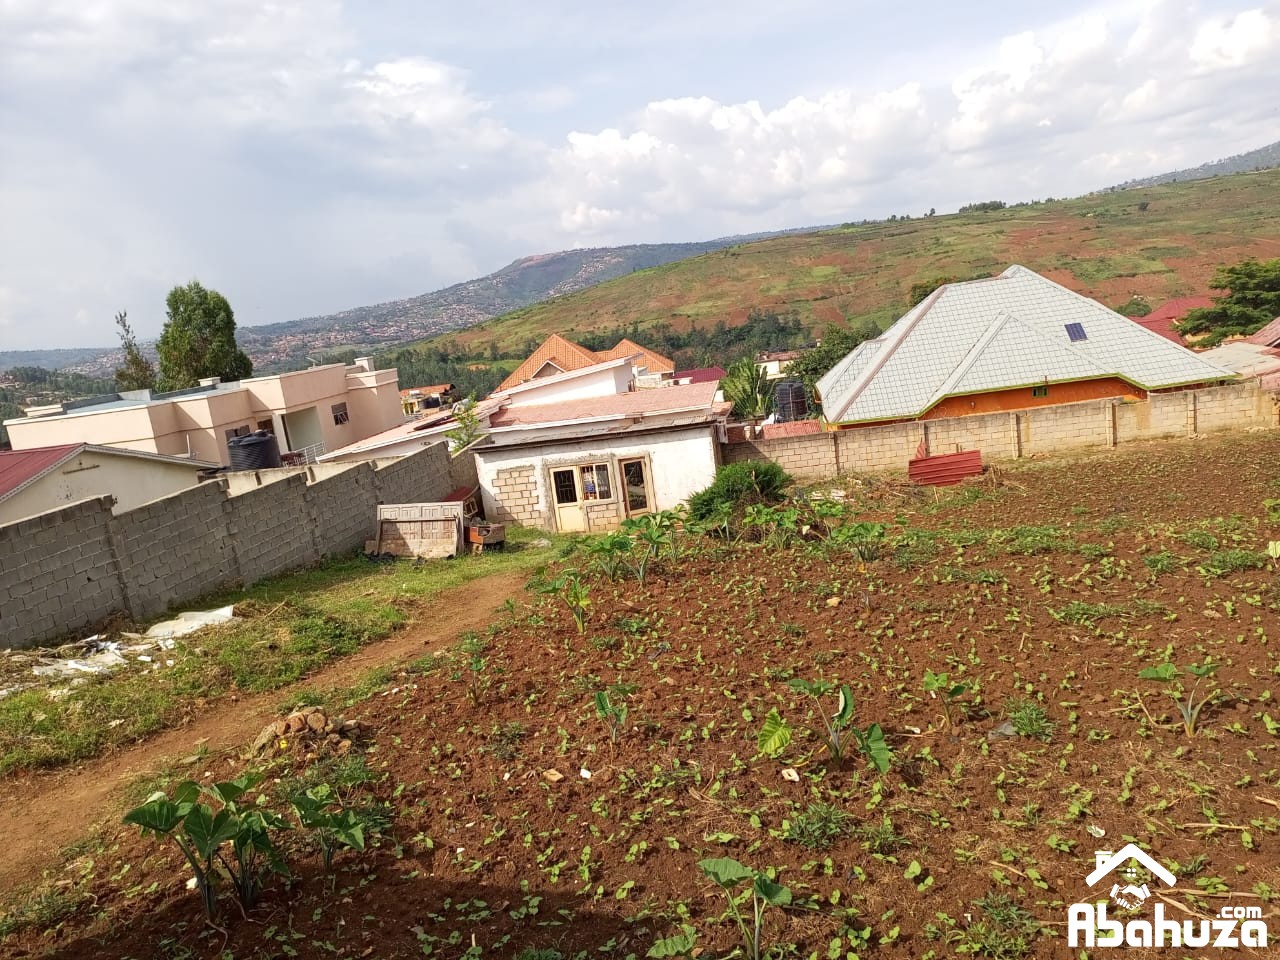 A FENCED BIG PLOT FOR SALE IN KIGALI AT GACURIRO